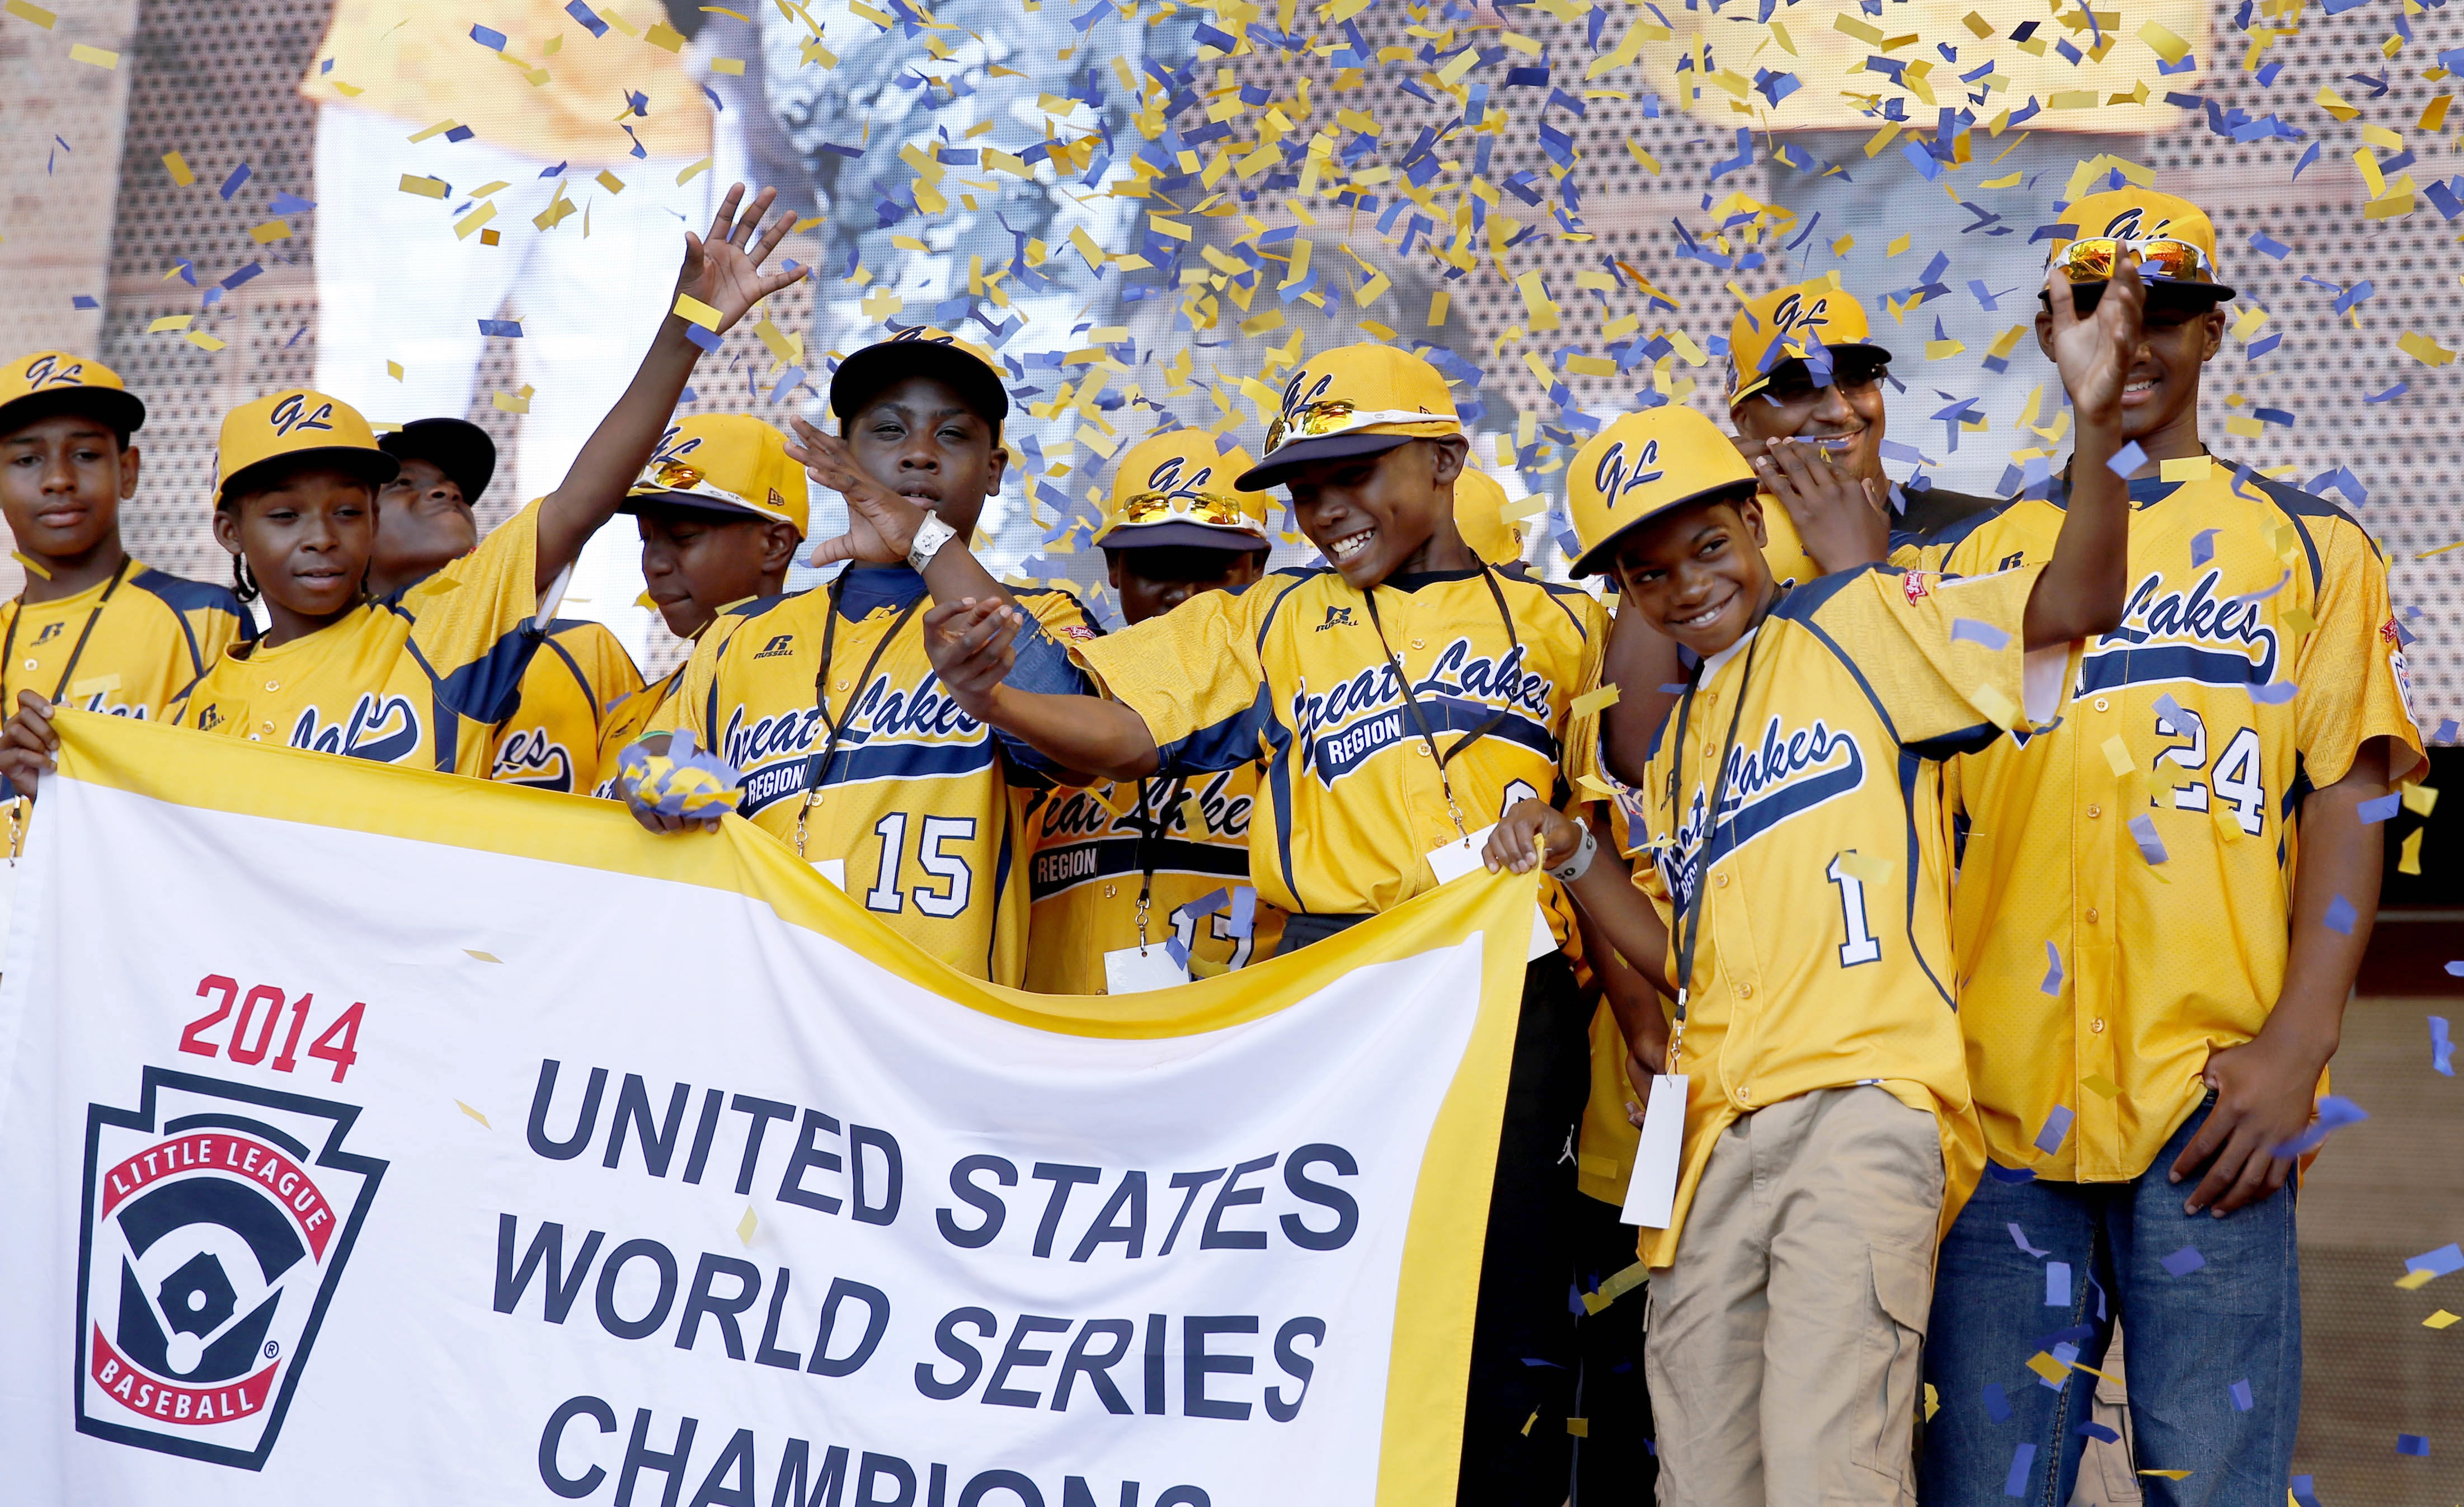 FILE - In this Aug. 27, 2014, file photo, members of the Jackie Robinson West Little League baseball team participate in a rally celebrating the team's U.S. Little League Championship in Chicago. Little League International has stripped Chicago's Jackie Robinson West team of its national title after finding the team falsified its boundary map. The league made the announcement Wednesday morning, Feb. 11, 2015, saying the Chicago team violated regulations by placing players on the team who didnt qualify because they lived outside the teams boundaries. Little League International also suspended Jackie Robinson West manager Darold Butler from league activity. Associated Press